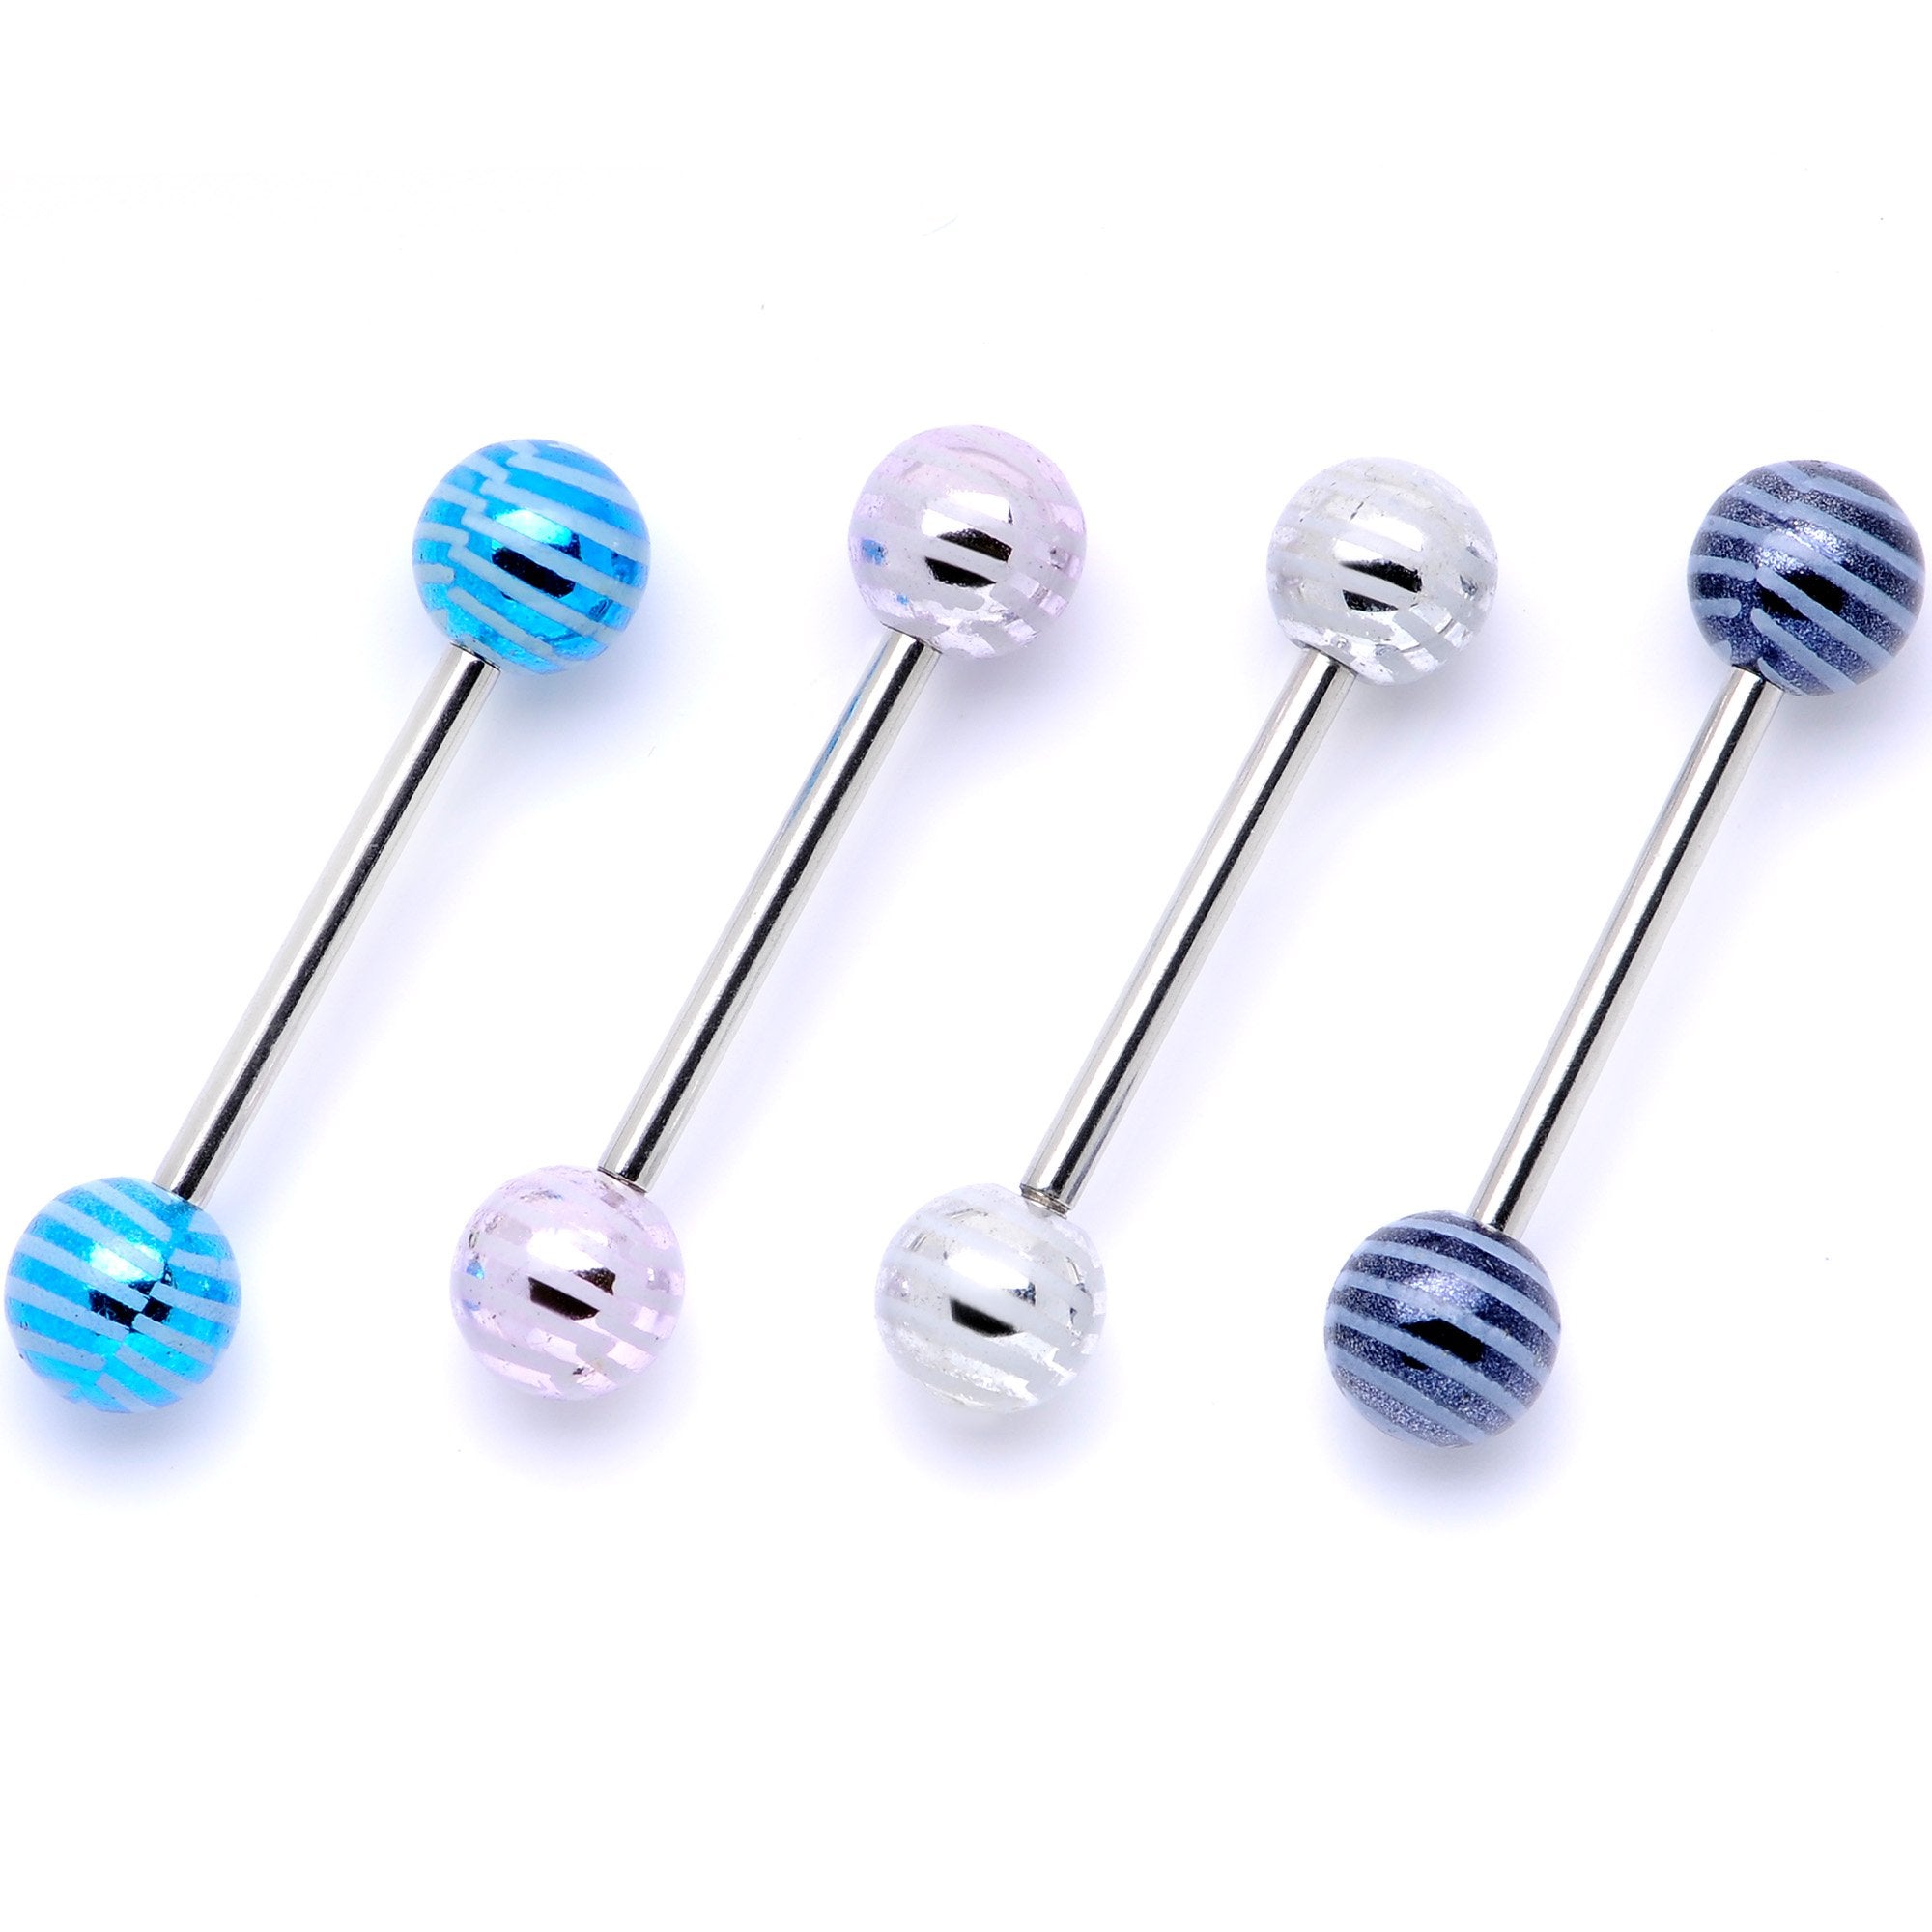 Evening Stripes Party Barbell Tongue Ring Set of 4